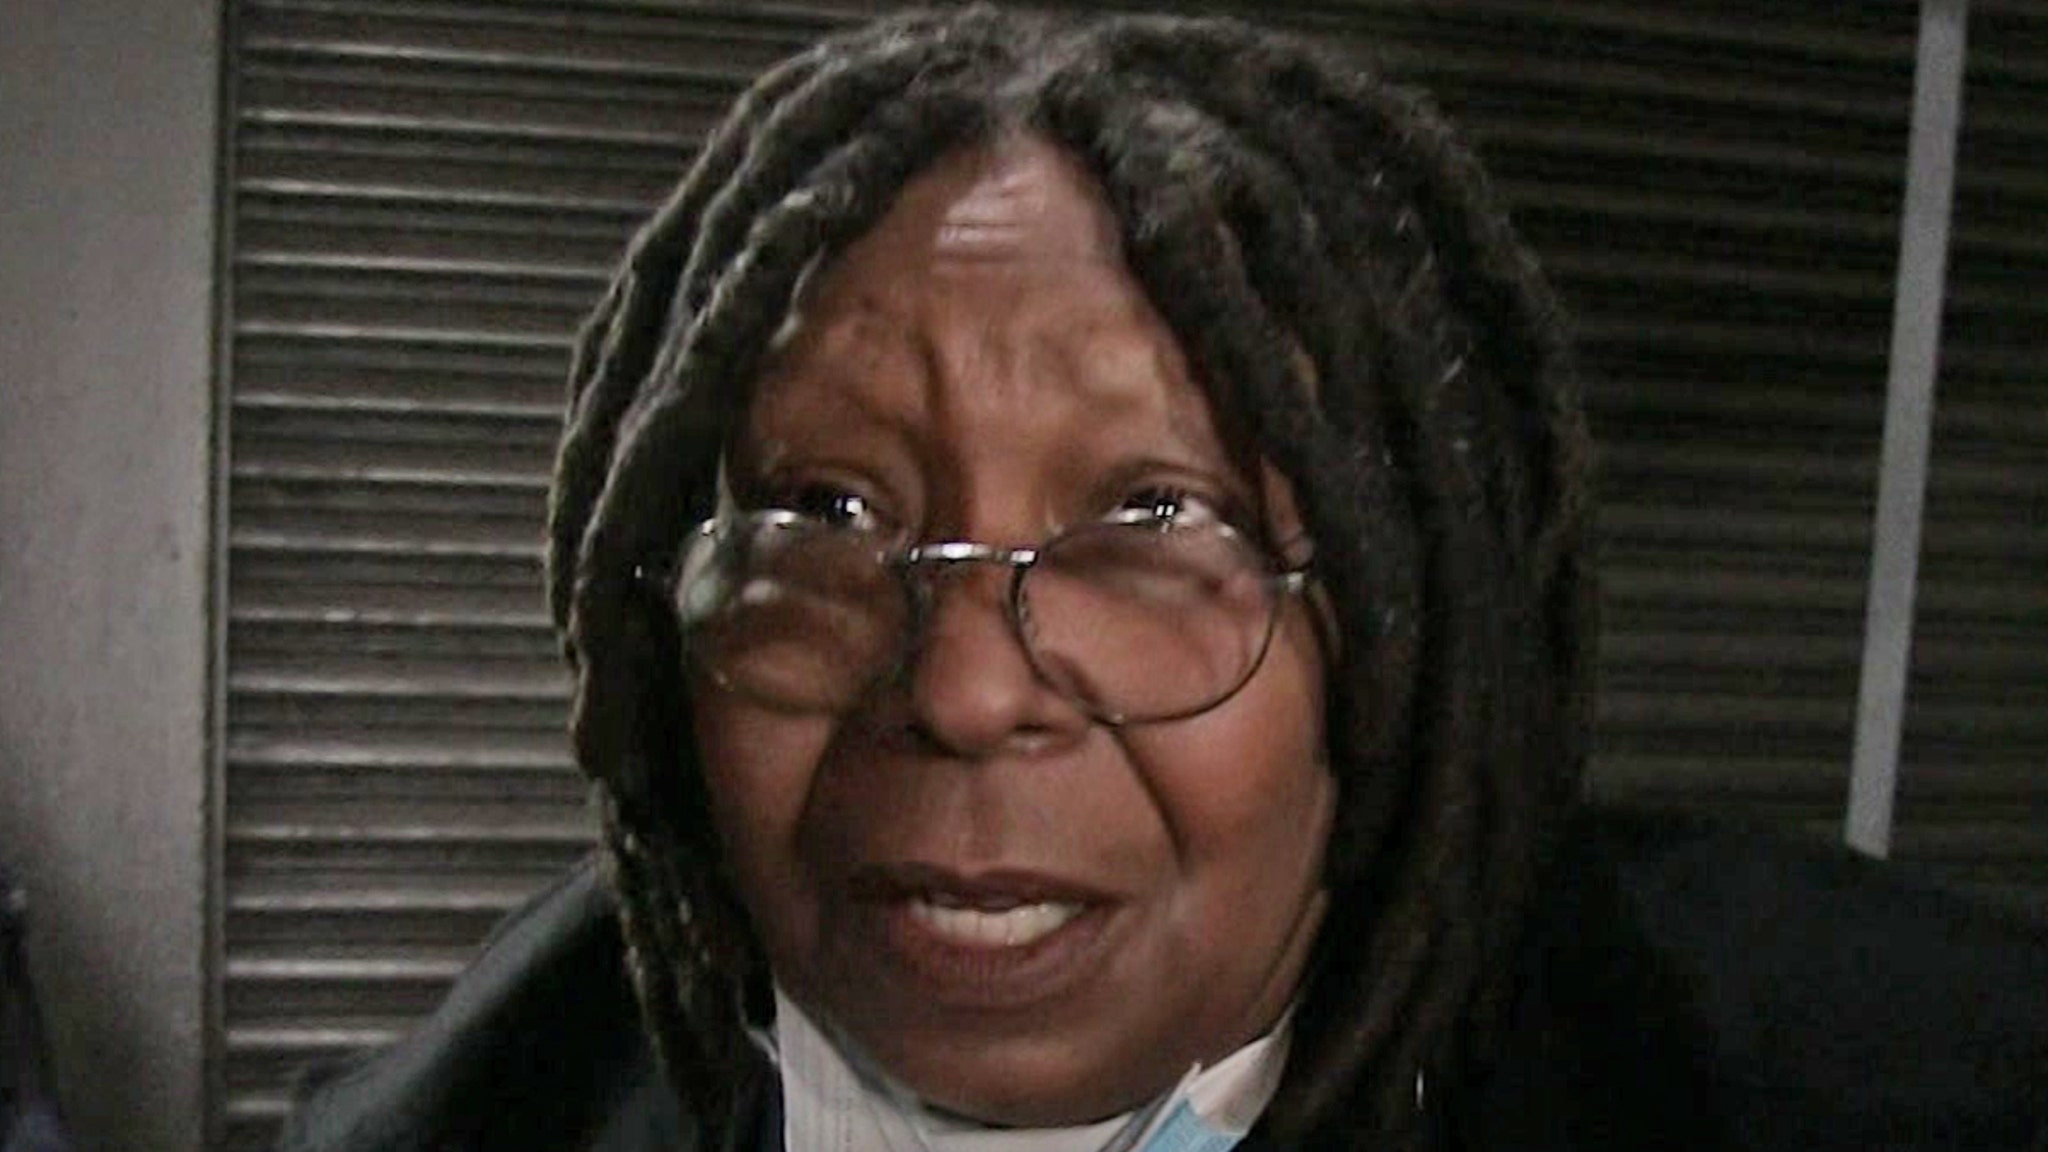 Whoopi Goldberg Apologizes For Doubling Down on Holocaust Views thumbnail